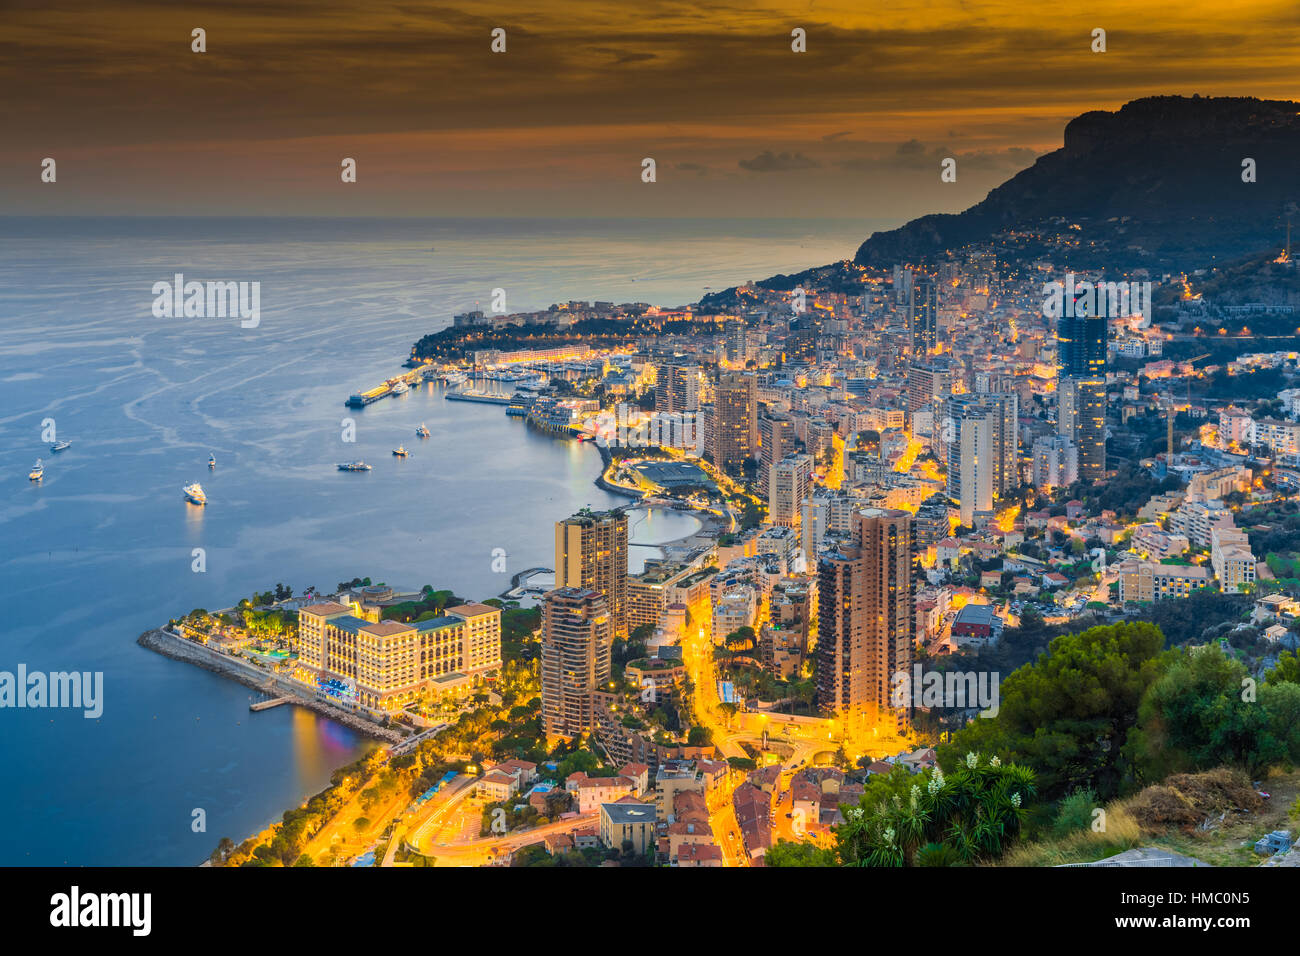 Monaco, Monte-Carlo, 26 September 2016: Aerial panoramic view the night city from hotel Vista, night illumination of yachts, streets, buildings, long  Stock Photo